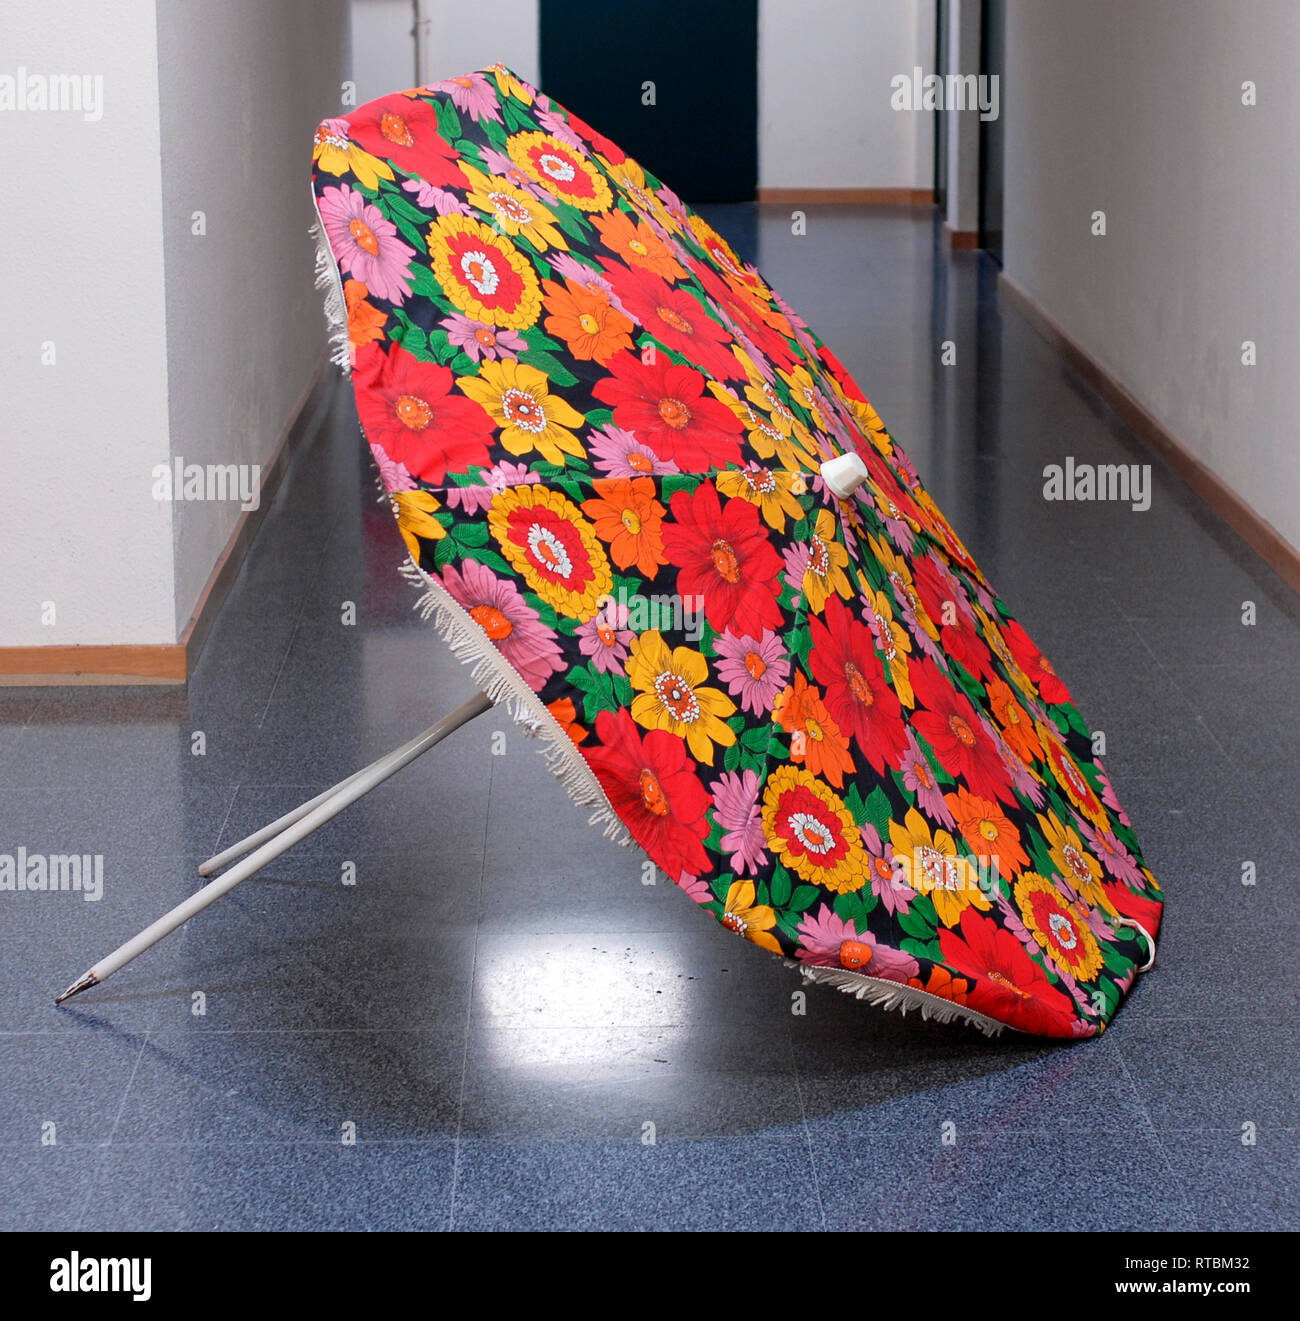 Vintage beach umbrella in fabric with flowers, photographed indoors Stock  Photo - Alamy